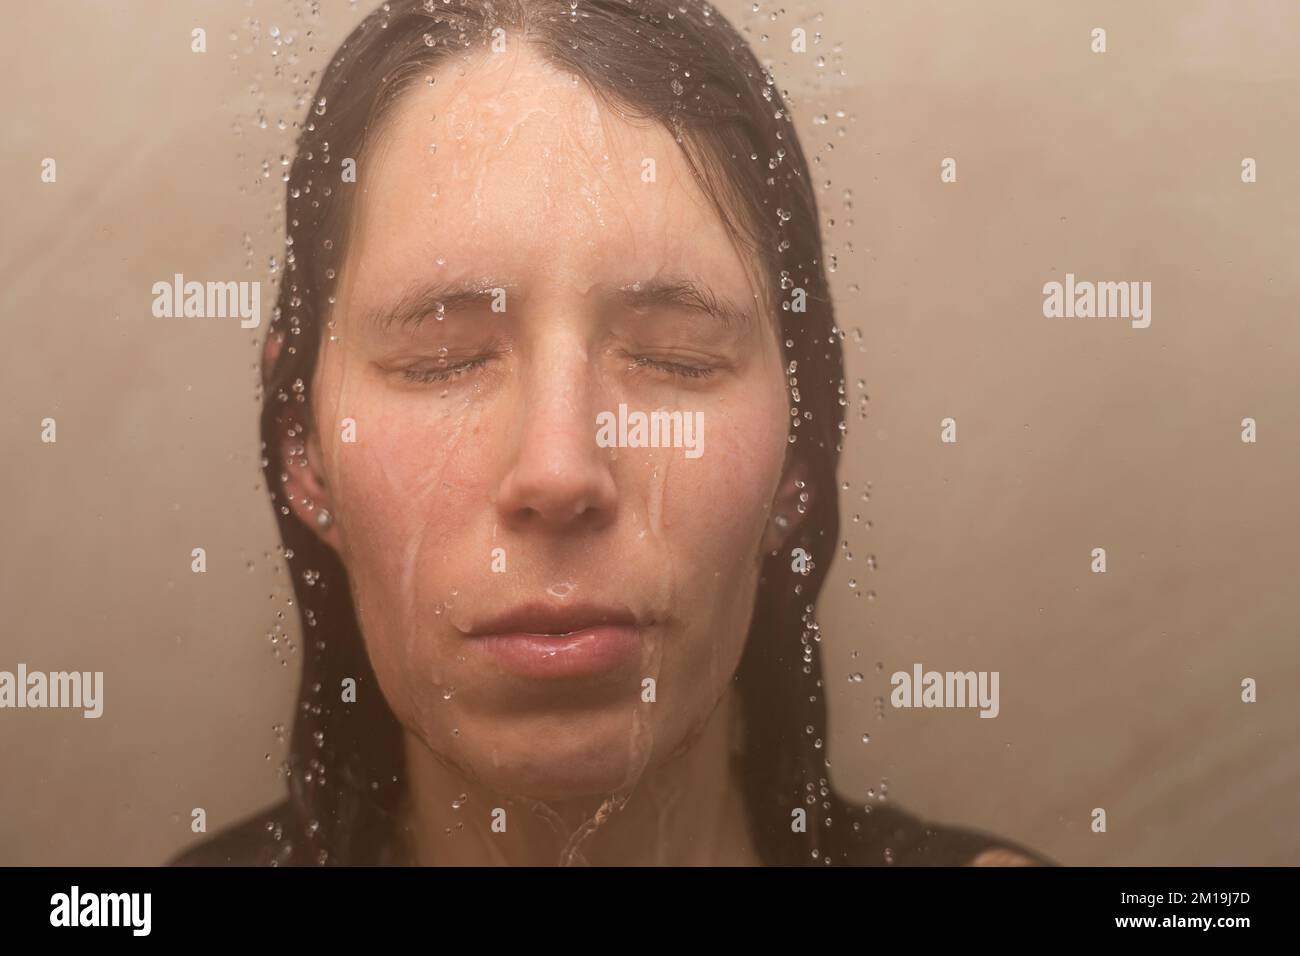 Young woman in shower with water running down her emotional face. Concept: feeling down, depression, domestic violence victim, had enough, depression Stock Photo